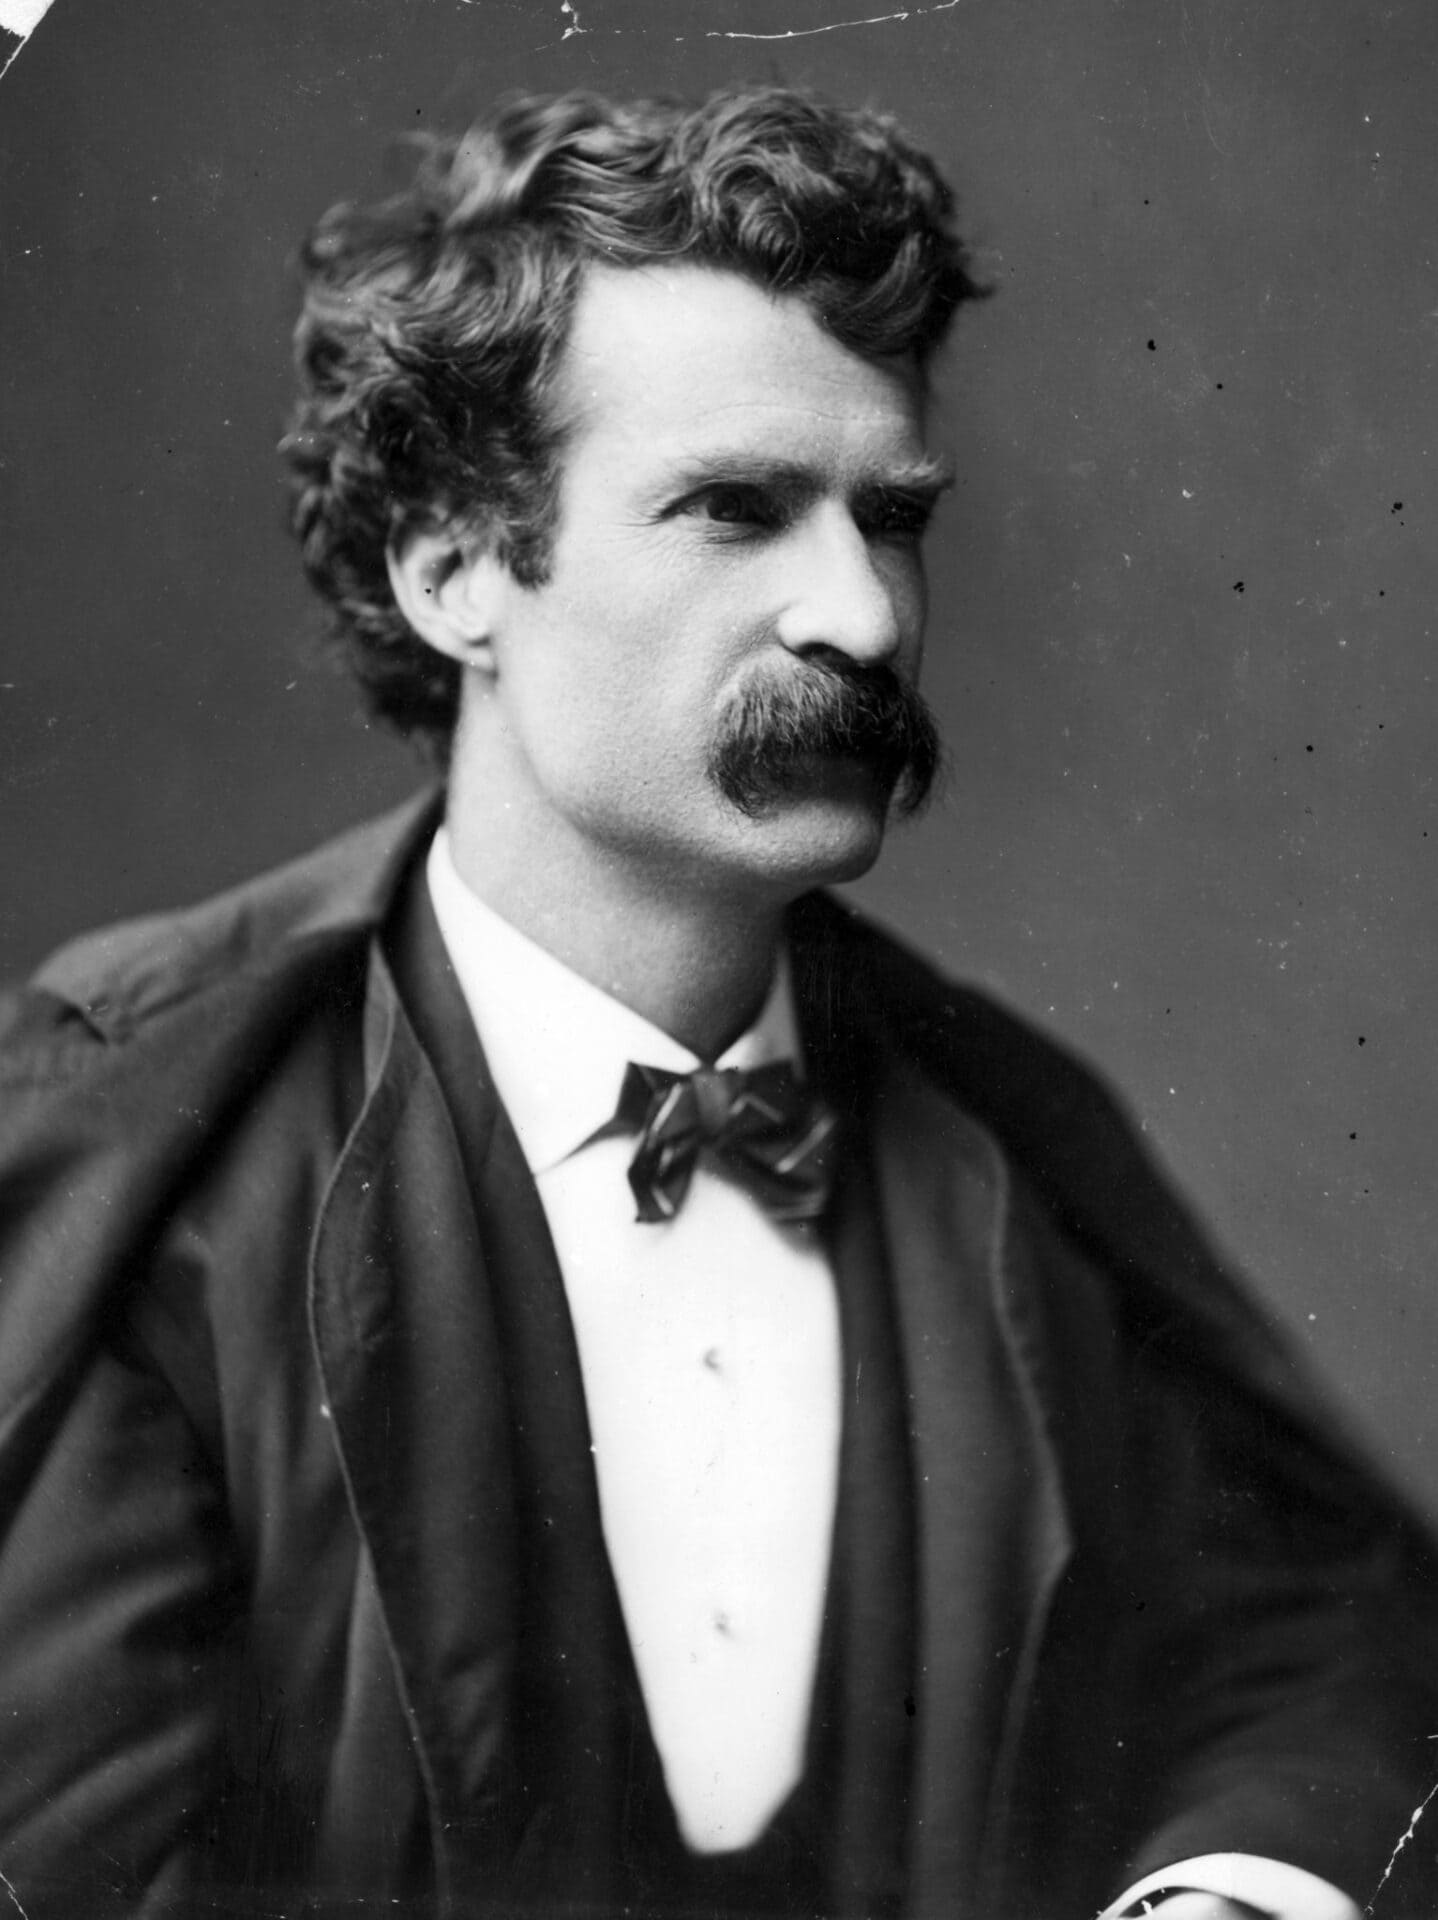 All about Mark Twain's early life